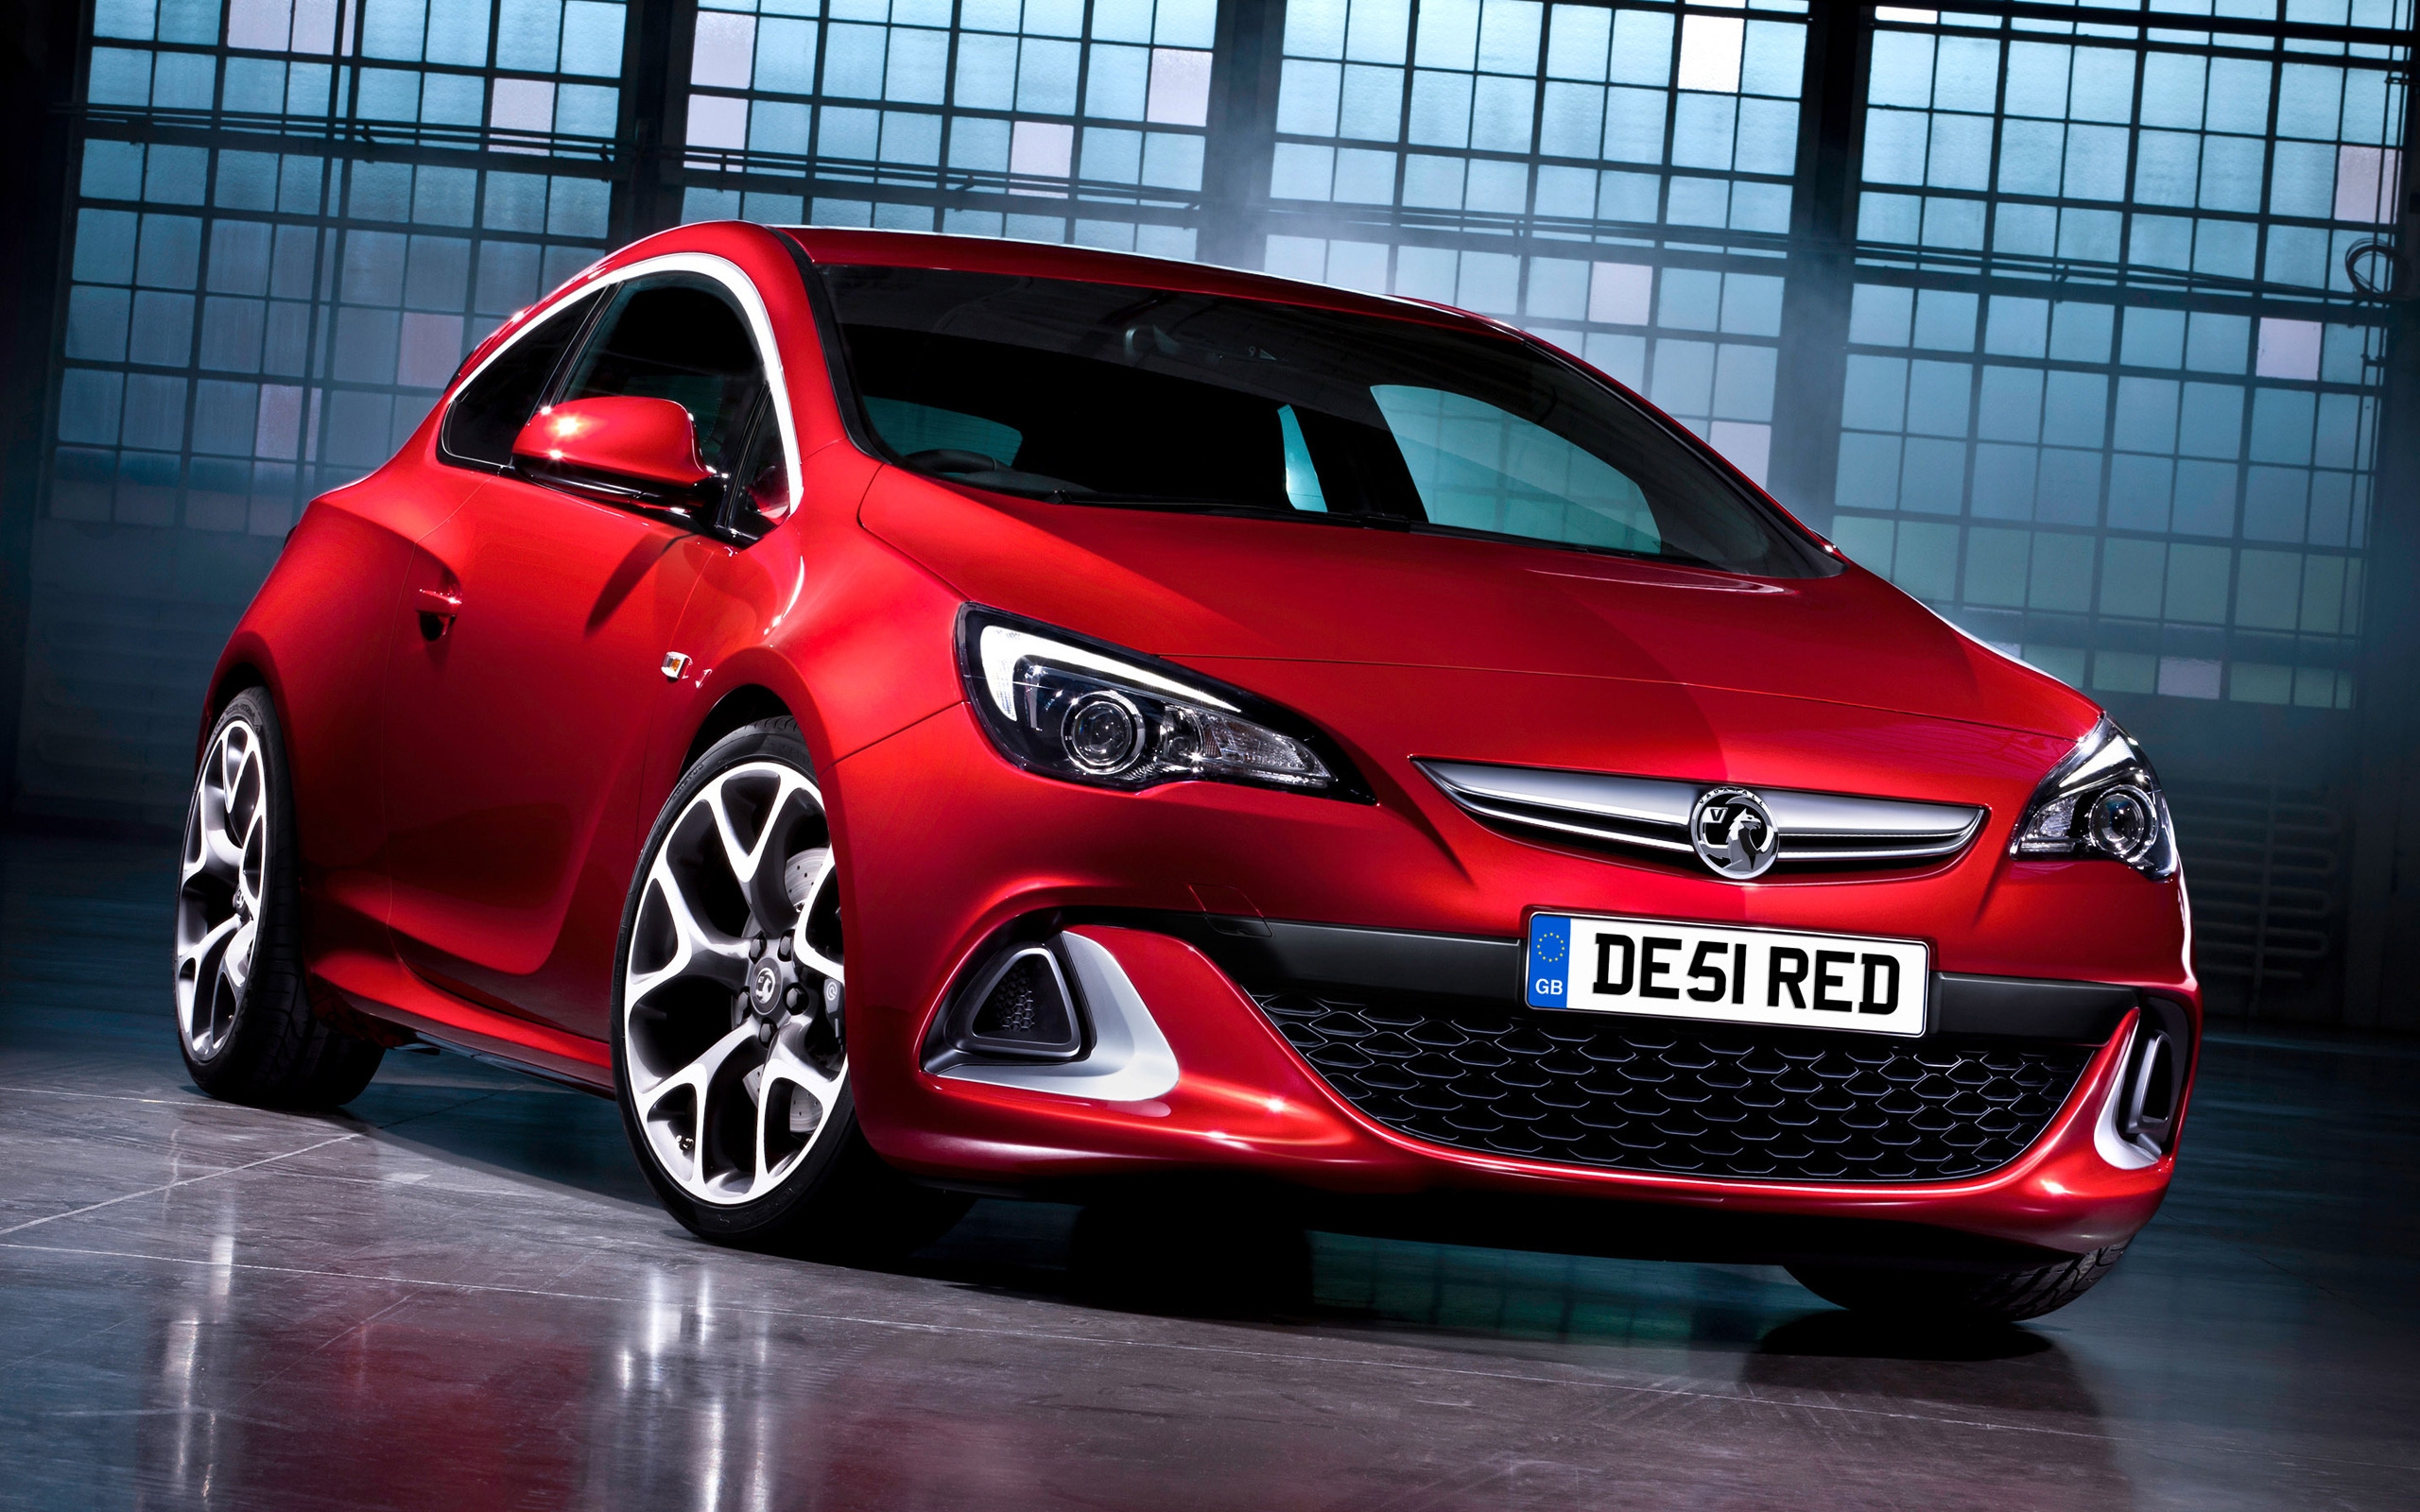 2012 Vauxhall Astra GTC for 2560 x 1600 widescreen resolution